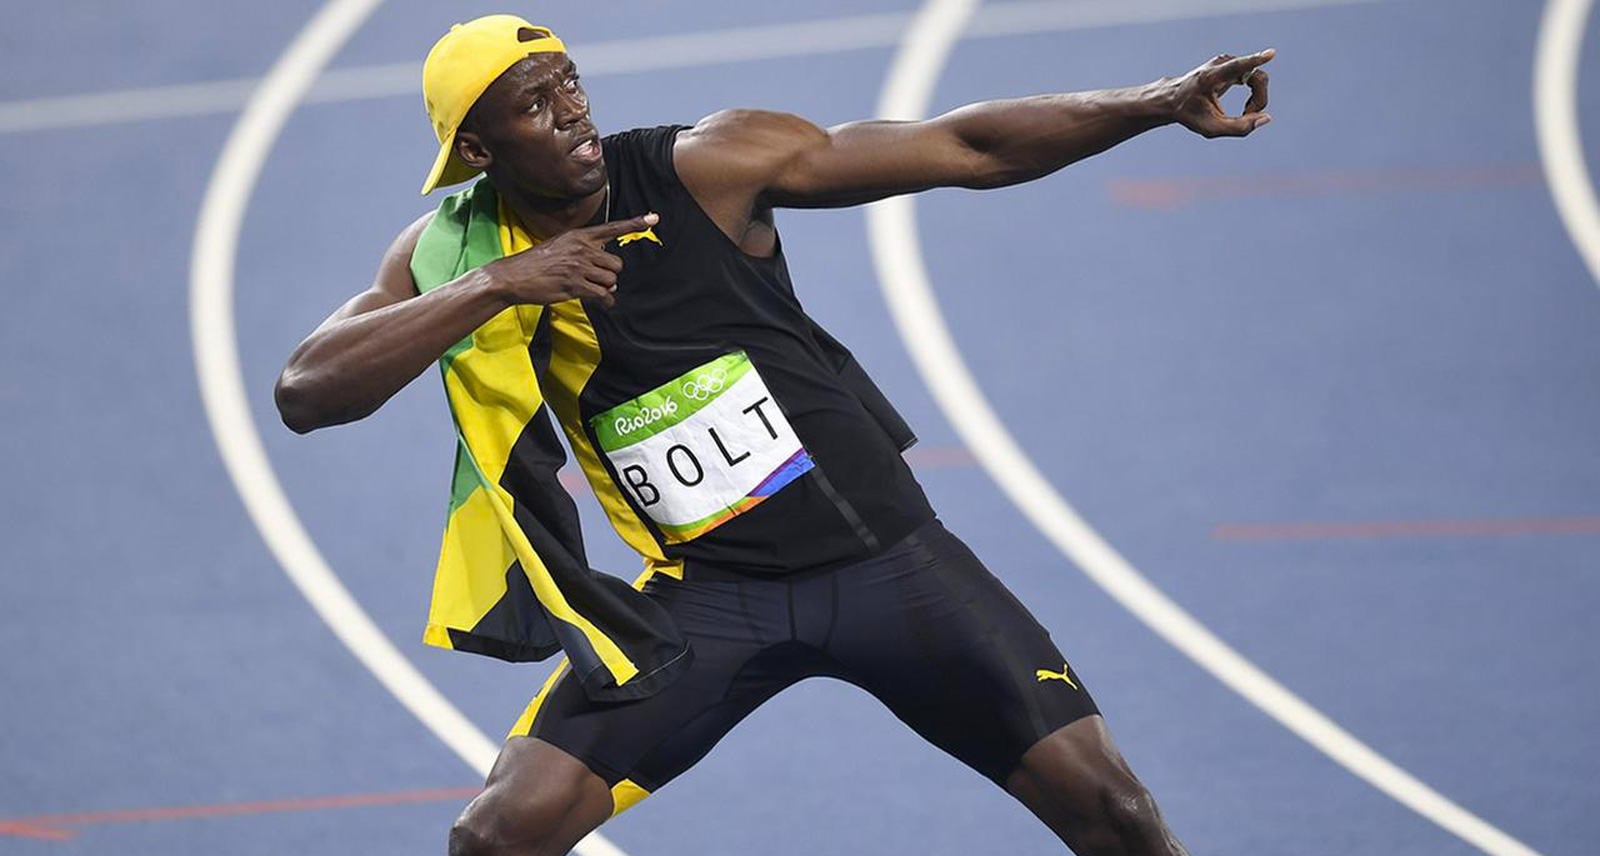 He’s the Fastest Man Alive, but Usain Bolt’s Mom Still Just Wants Grandkids ...